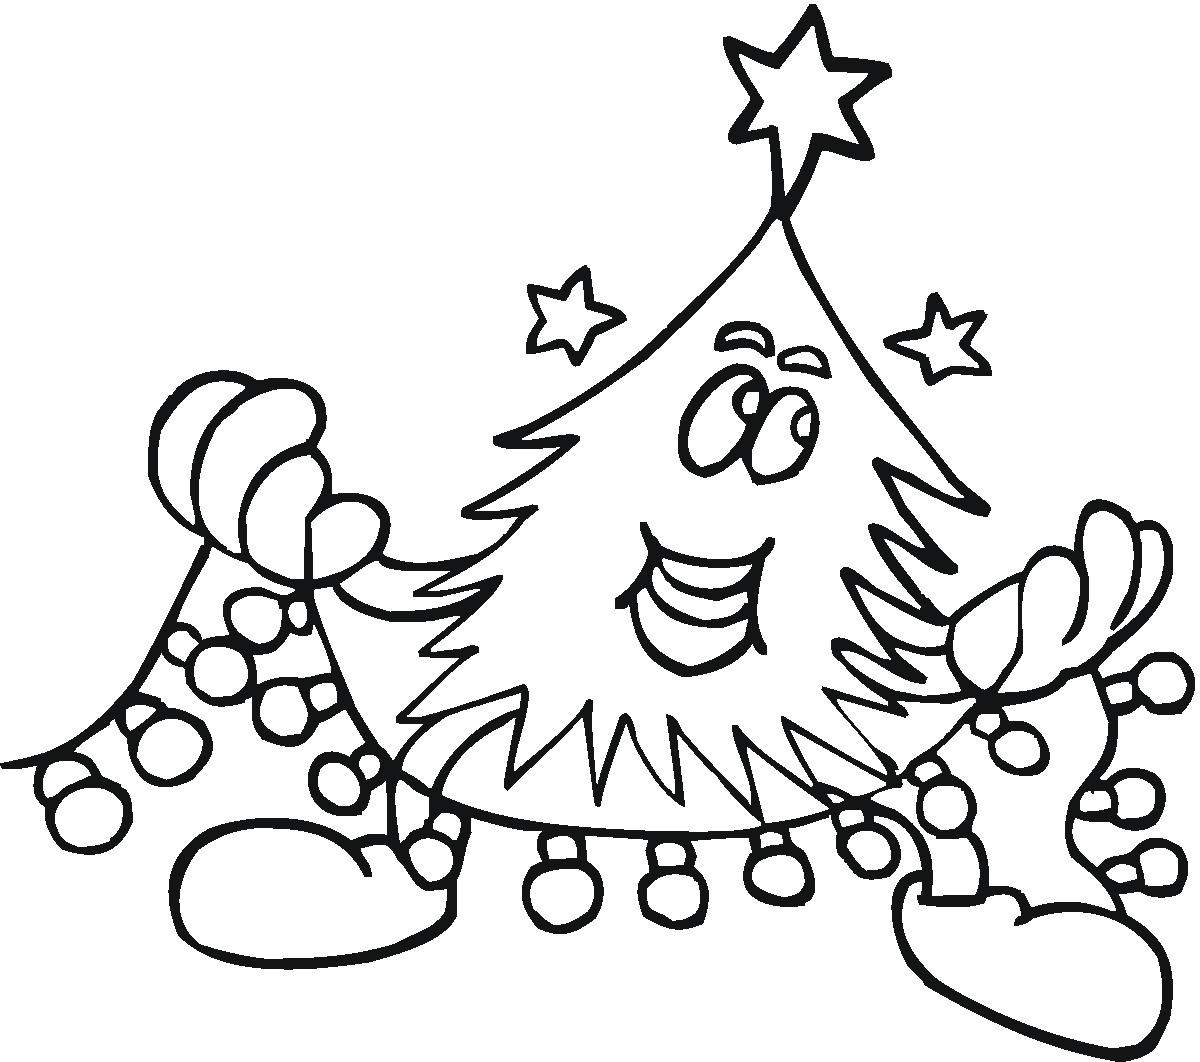 December Coloring Pages - Best Coloring Pages For Kids